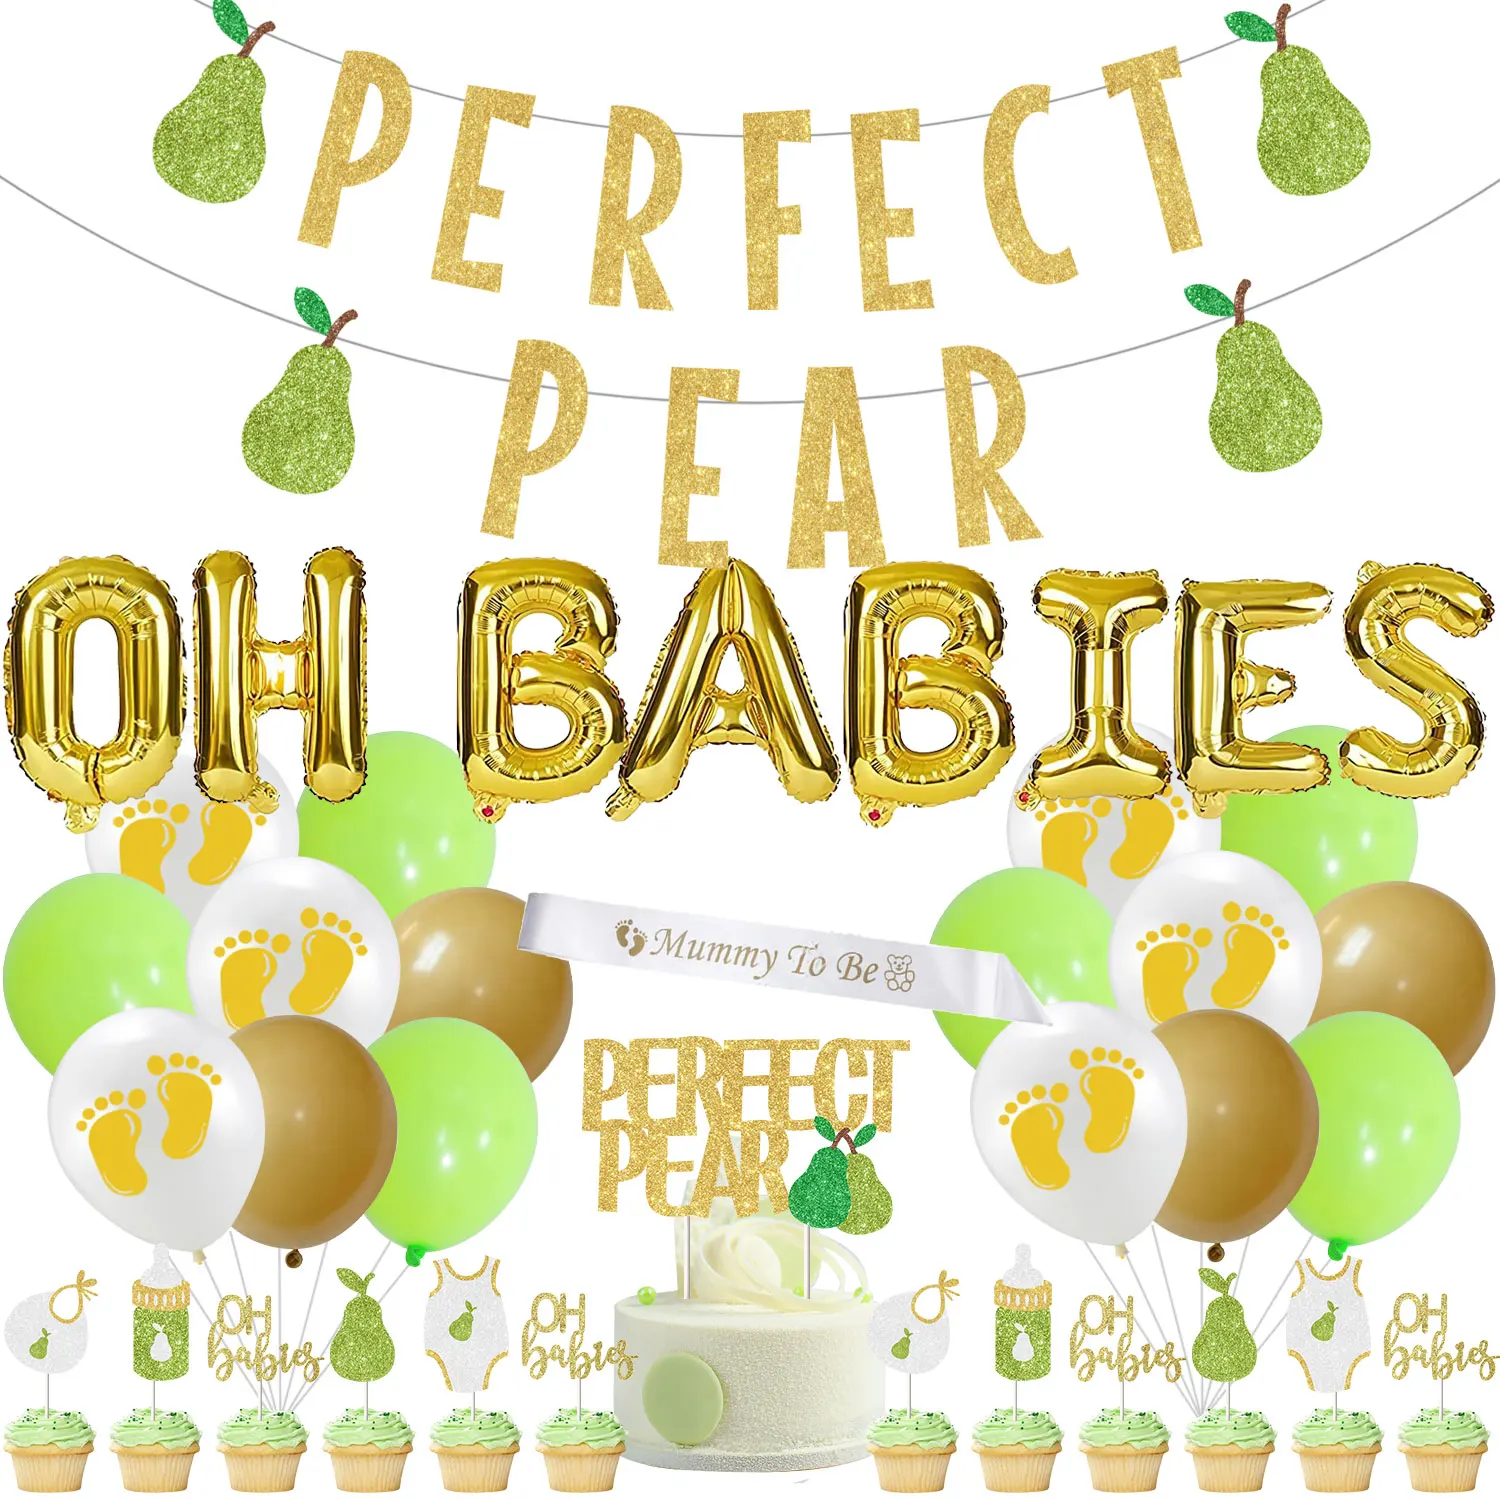 

Cheereveal Pear Theme Twins Baby Shower Decorations Gold Oh Babies Balloons Perfect Pear Banner Cake Topper Mummy To Be Sash Kit